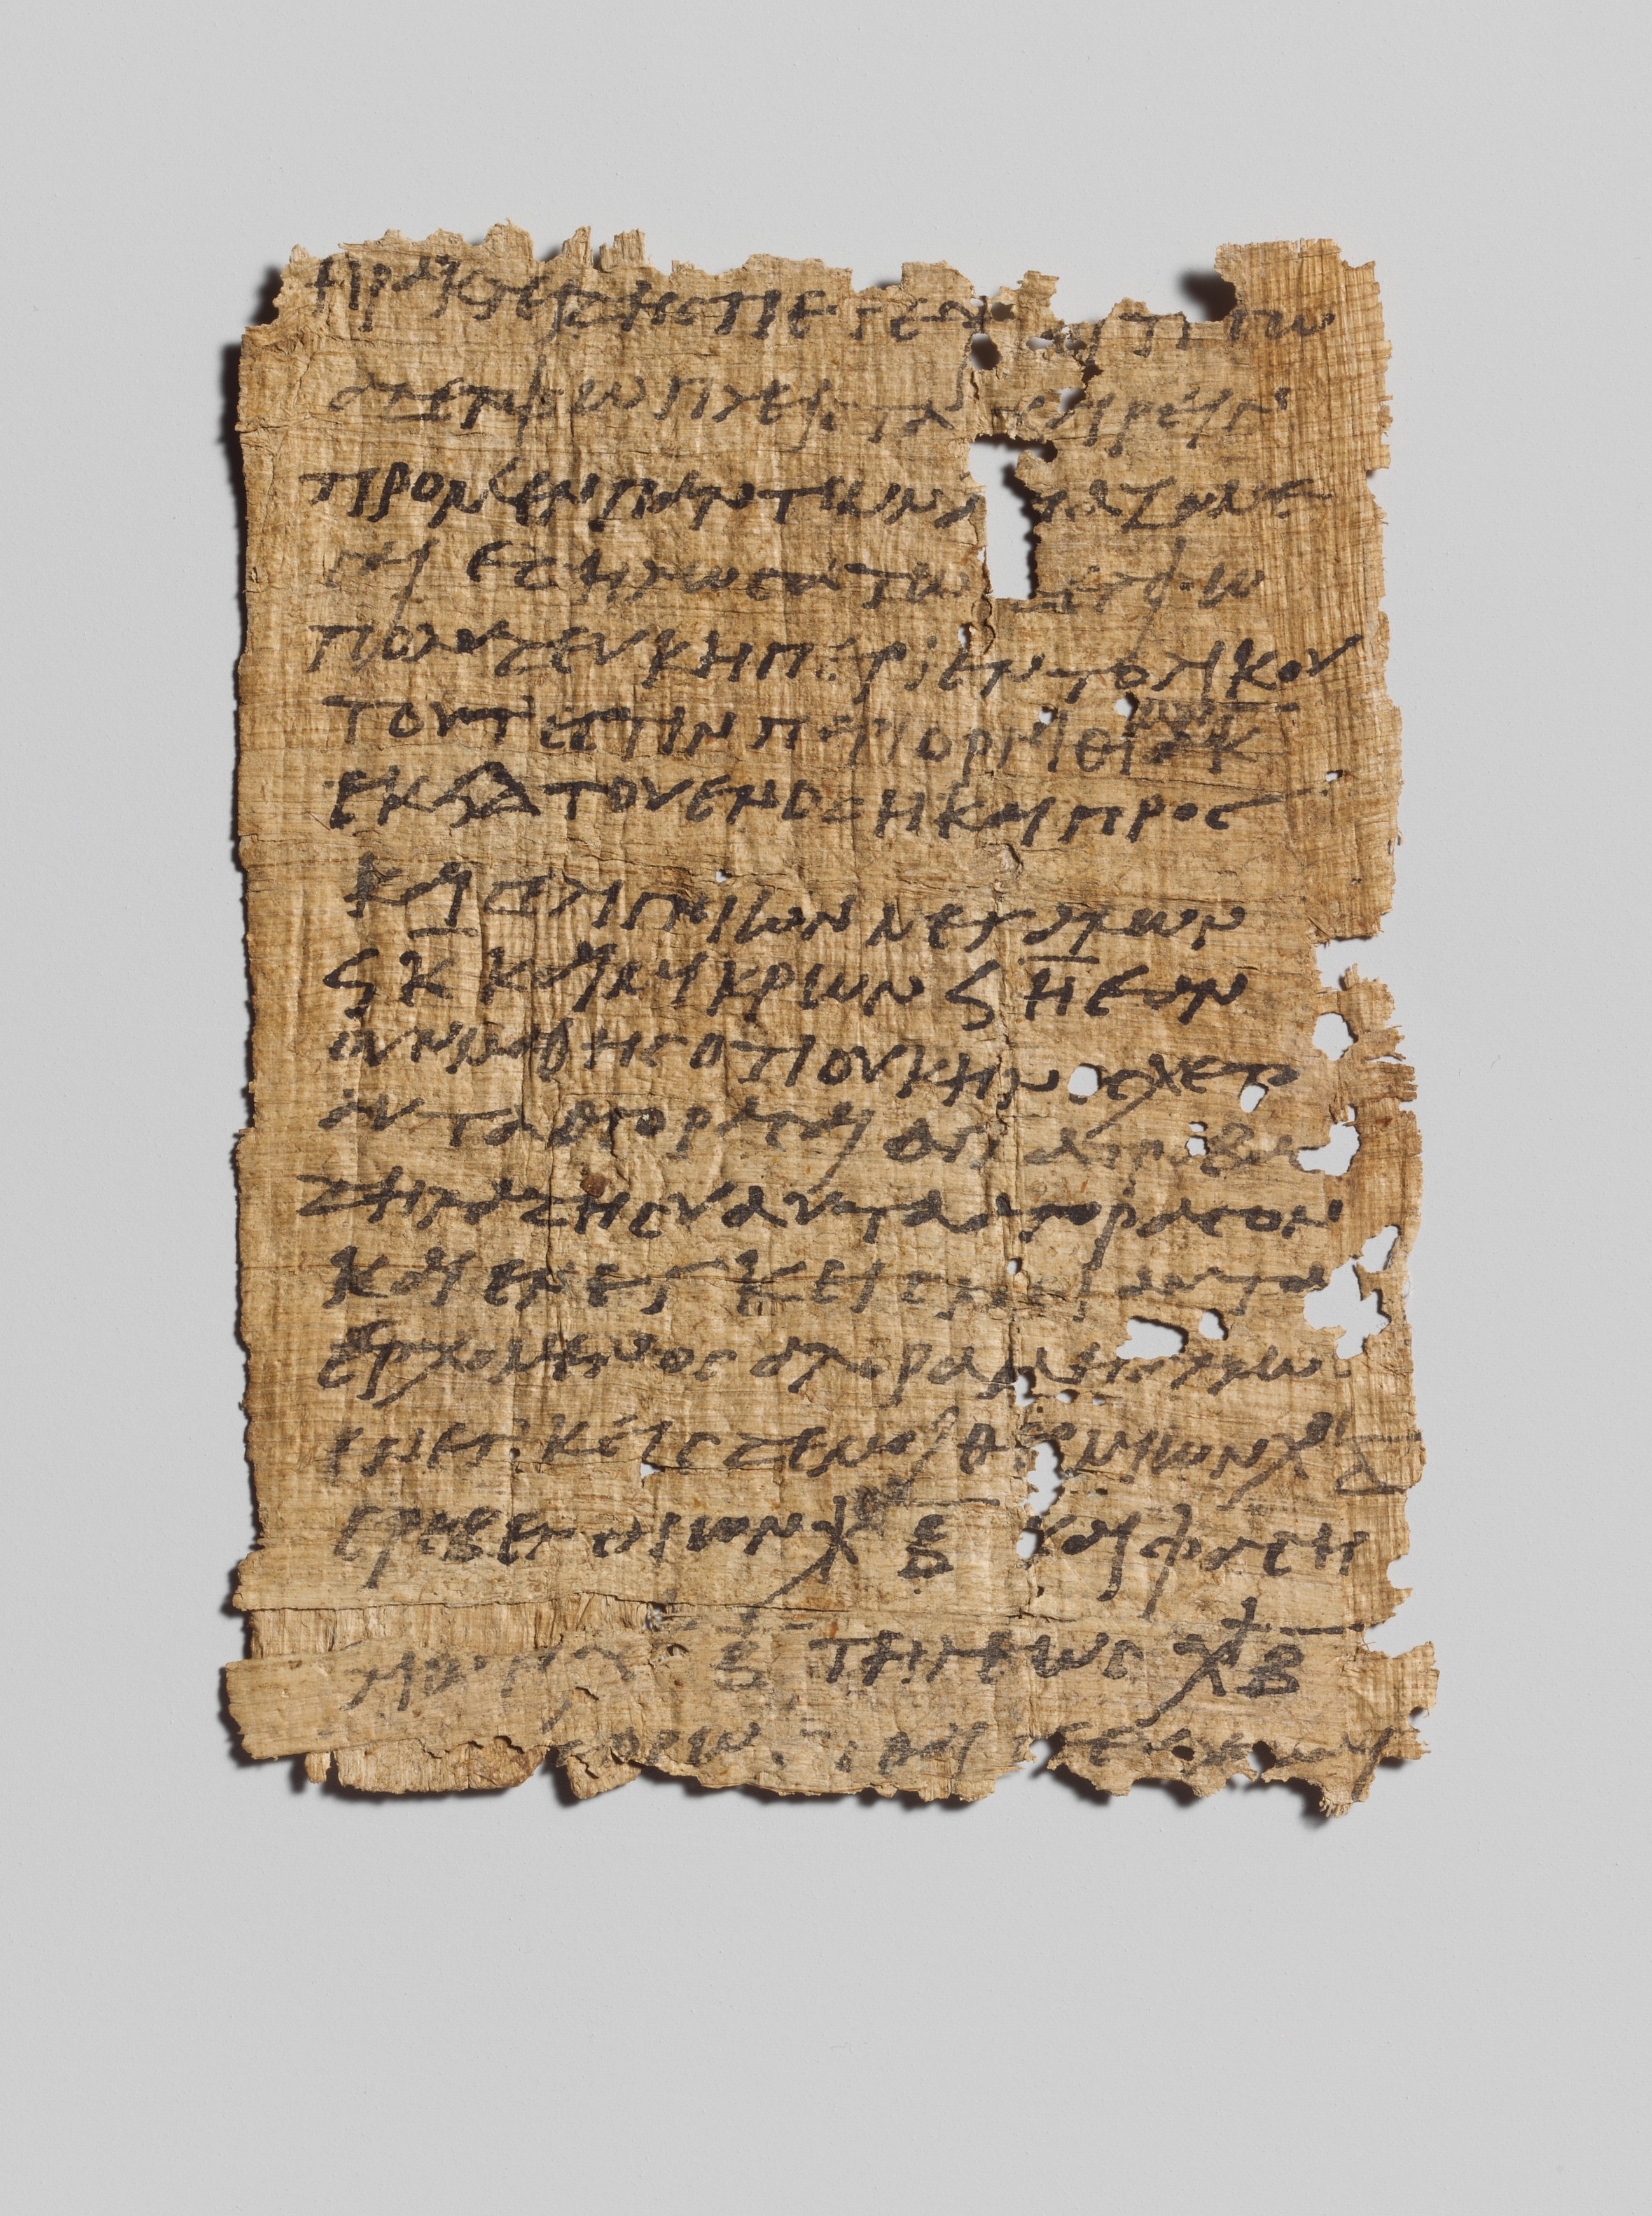 Title: Papyrus in Greek regarding tax issues (3rd ca. BC.)  Currently in the Metropolitan Mueum of Art. https://www.metmuseum.org/art/collection/search/251788 Source: Wikipedia Commons https://commons.wikimedia.org/wiki/File:Papyrus_in_Greek_regarding_tax